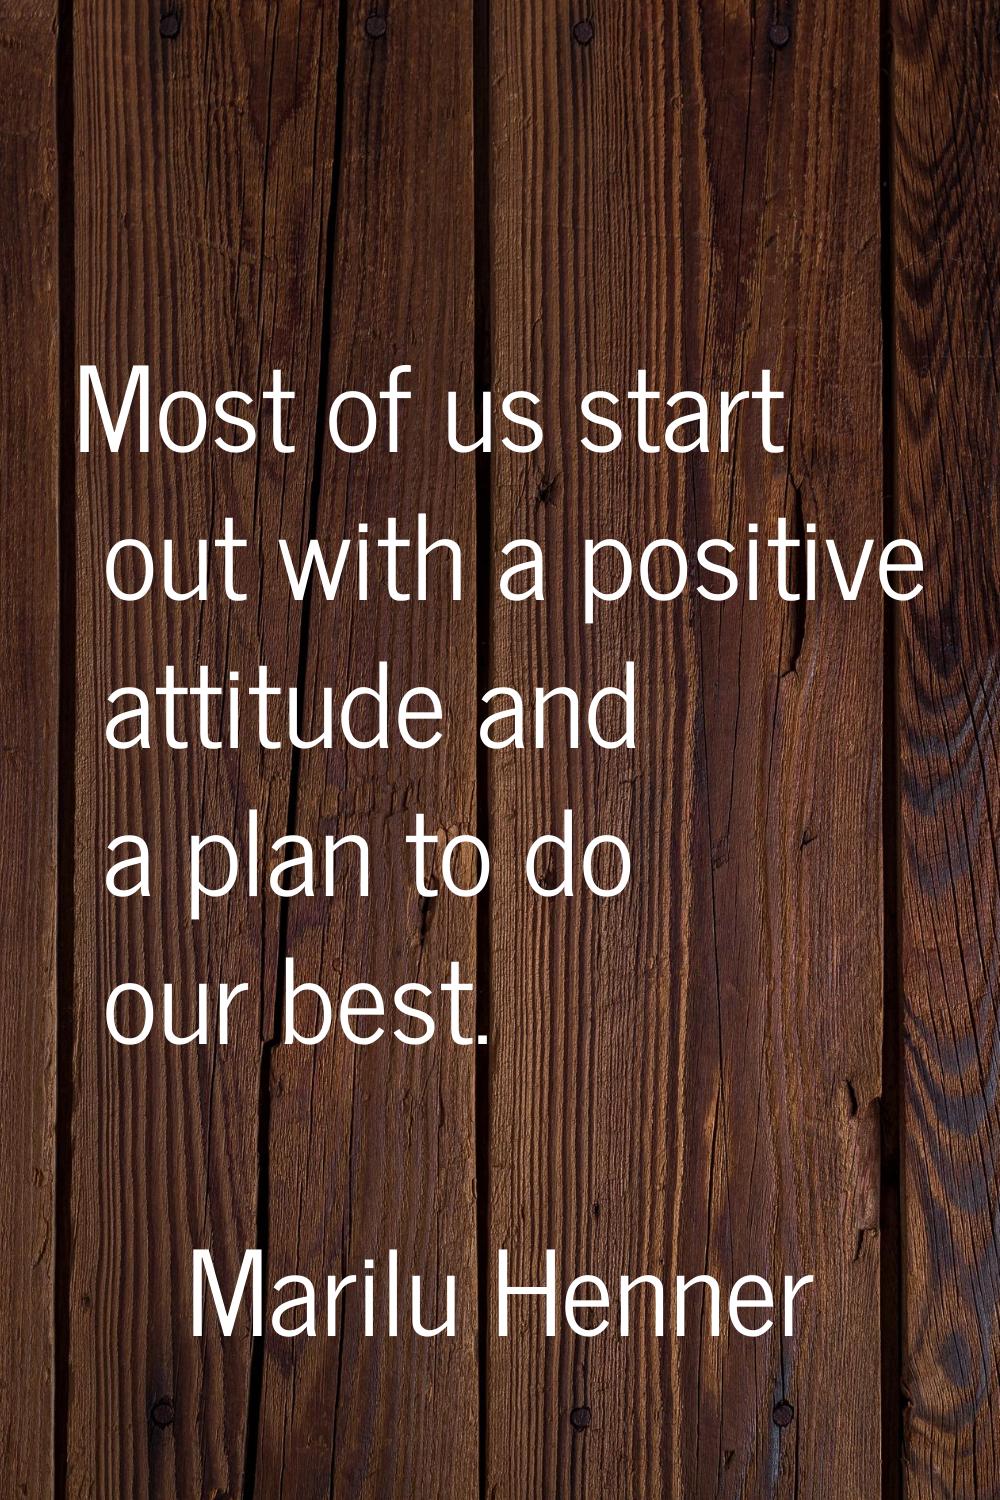 Most of us start out with a positive attitude and a plan to do our best.